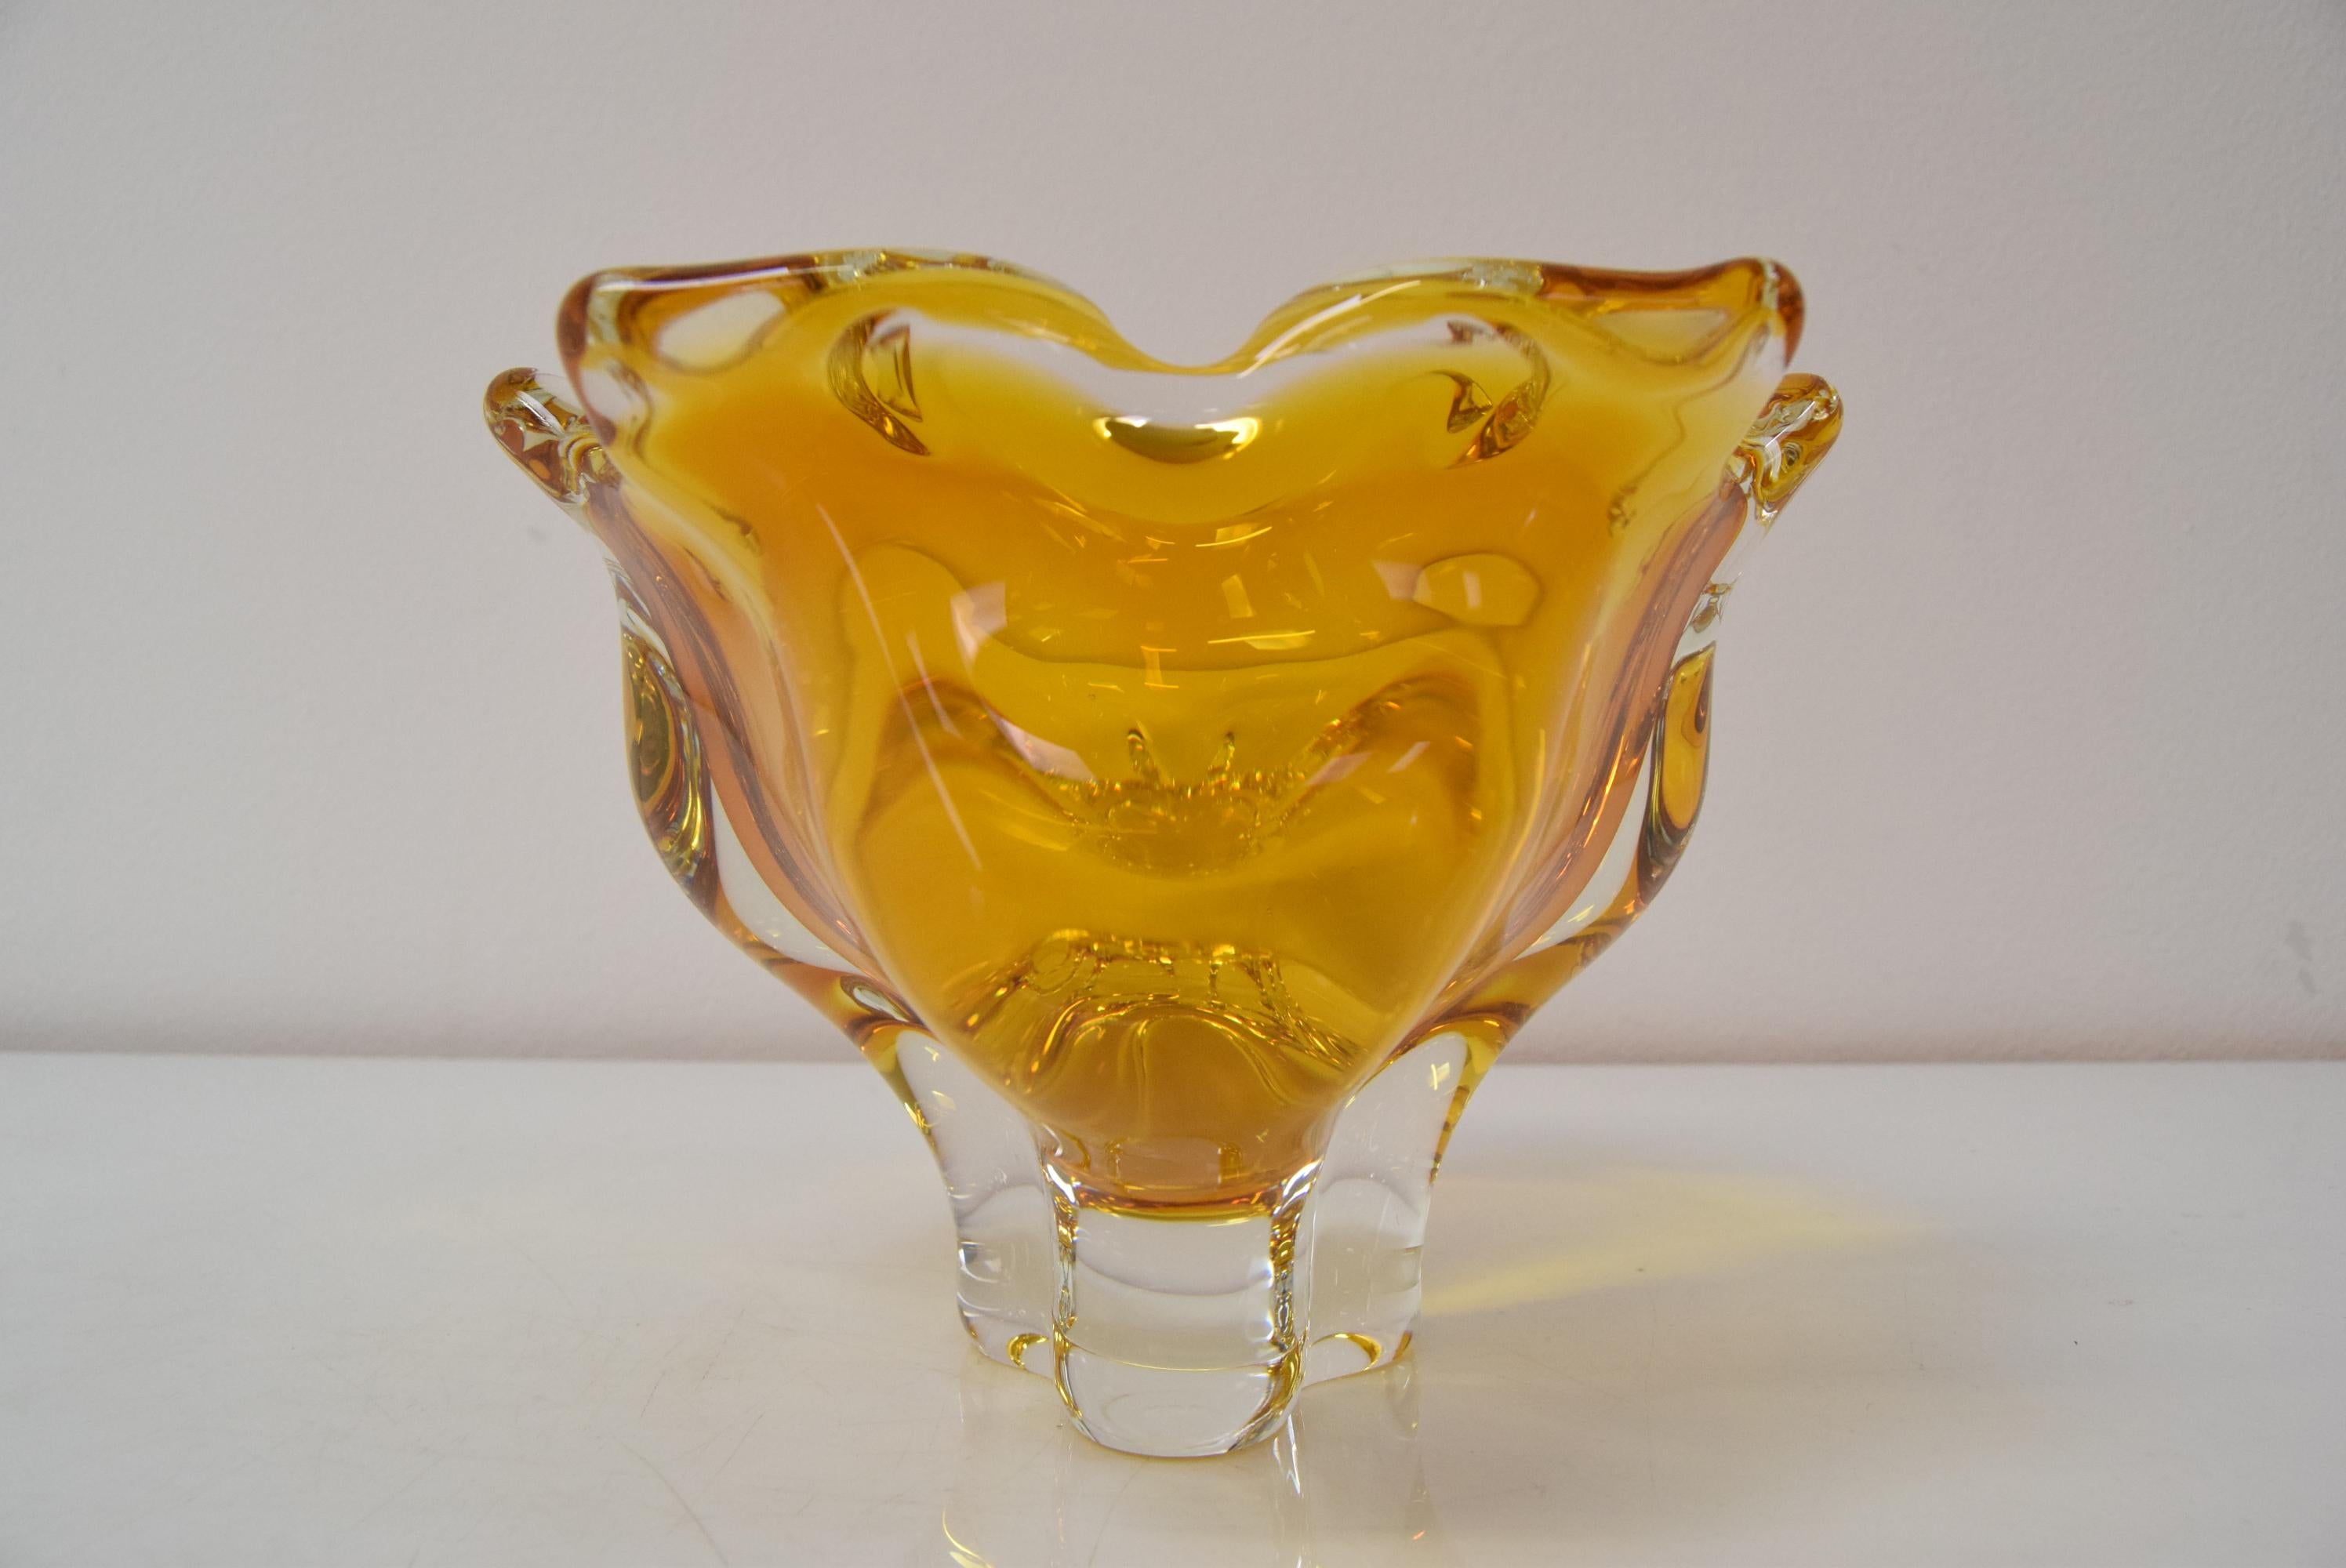 Made in Czechoslovakia
Made of Art glass
Chipped Glass(See Foto)
Re-polished
Original condition.